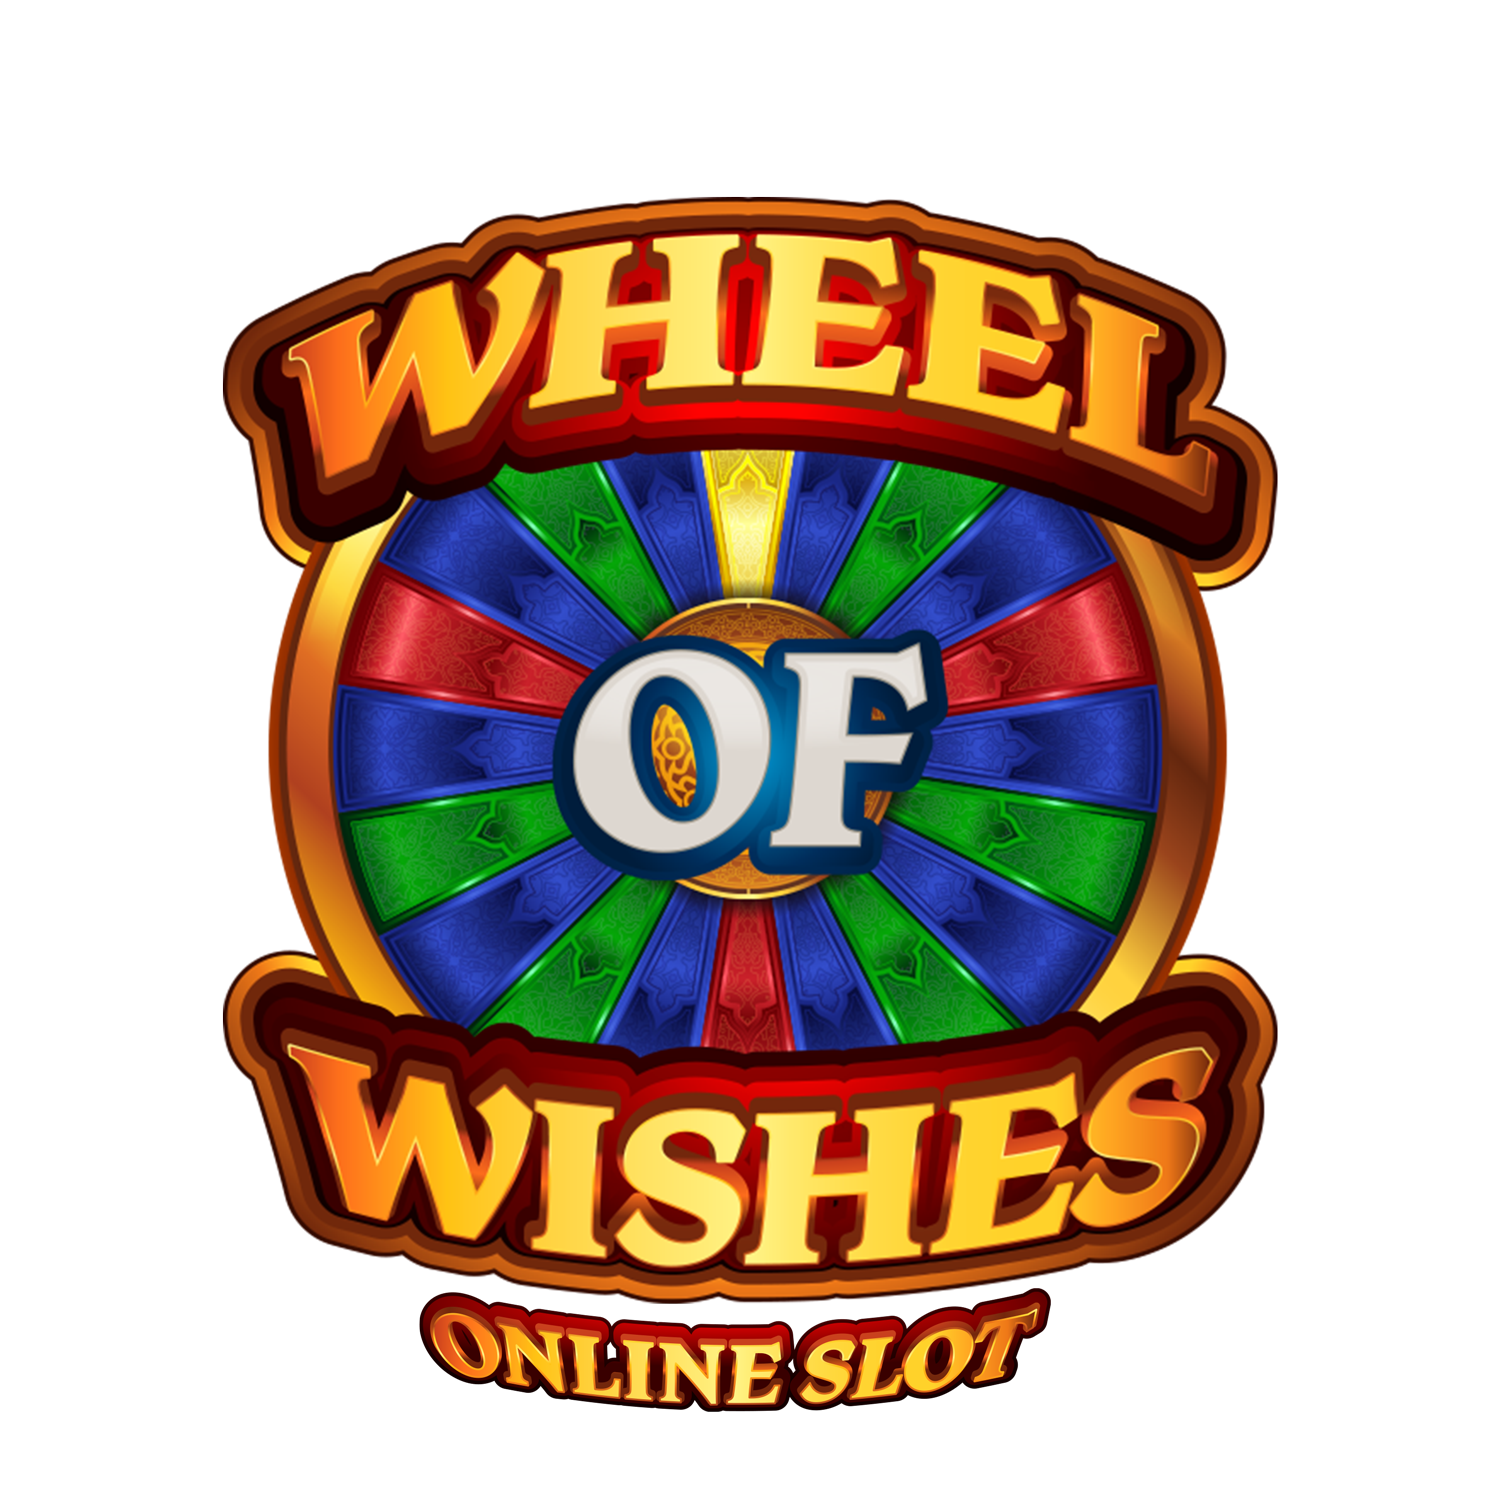 Wheel of wishes slot free play games